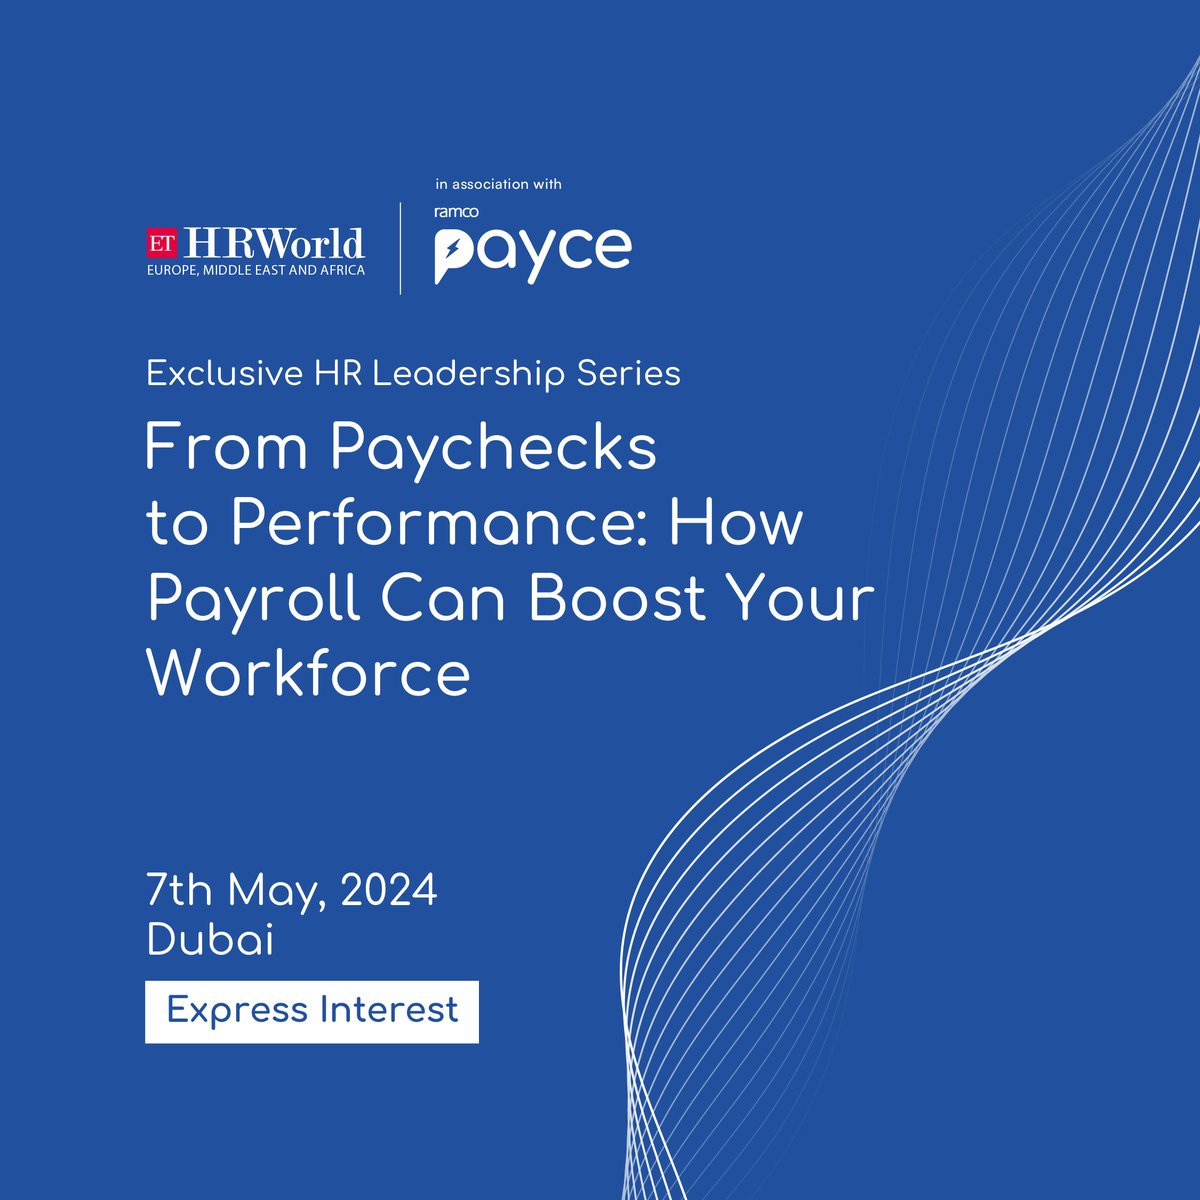 ETHRWorld EMEA in association with @RamcoSystems presents an exclusive HR Leadership Series on 'From Paychecks to Performance: How Payroll Can Boost Your Workforce' on May 7, 2024. Express Interest - zurl.co/autZ #ETHRWorldEMEA #Payroll #Workforce #Paycheck